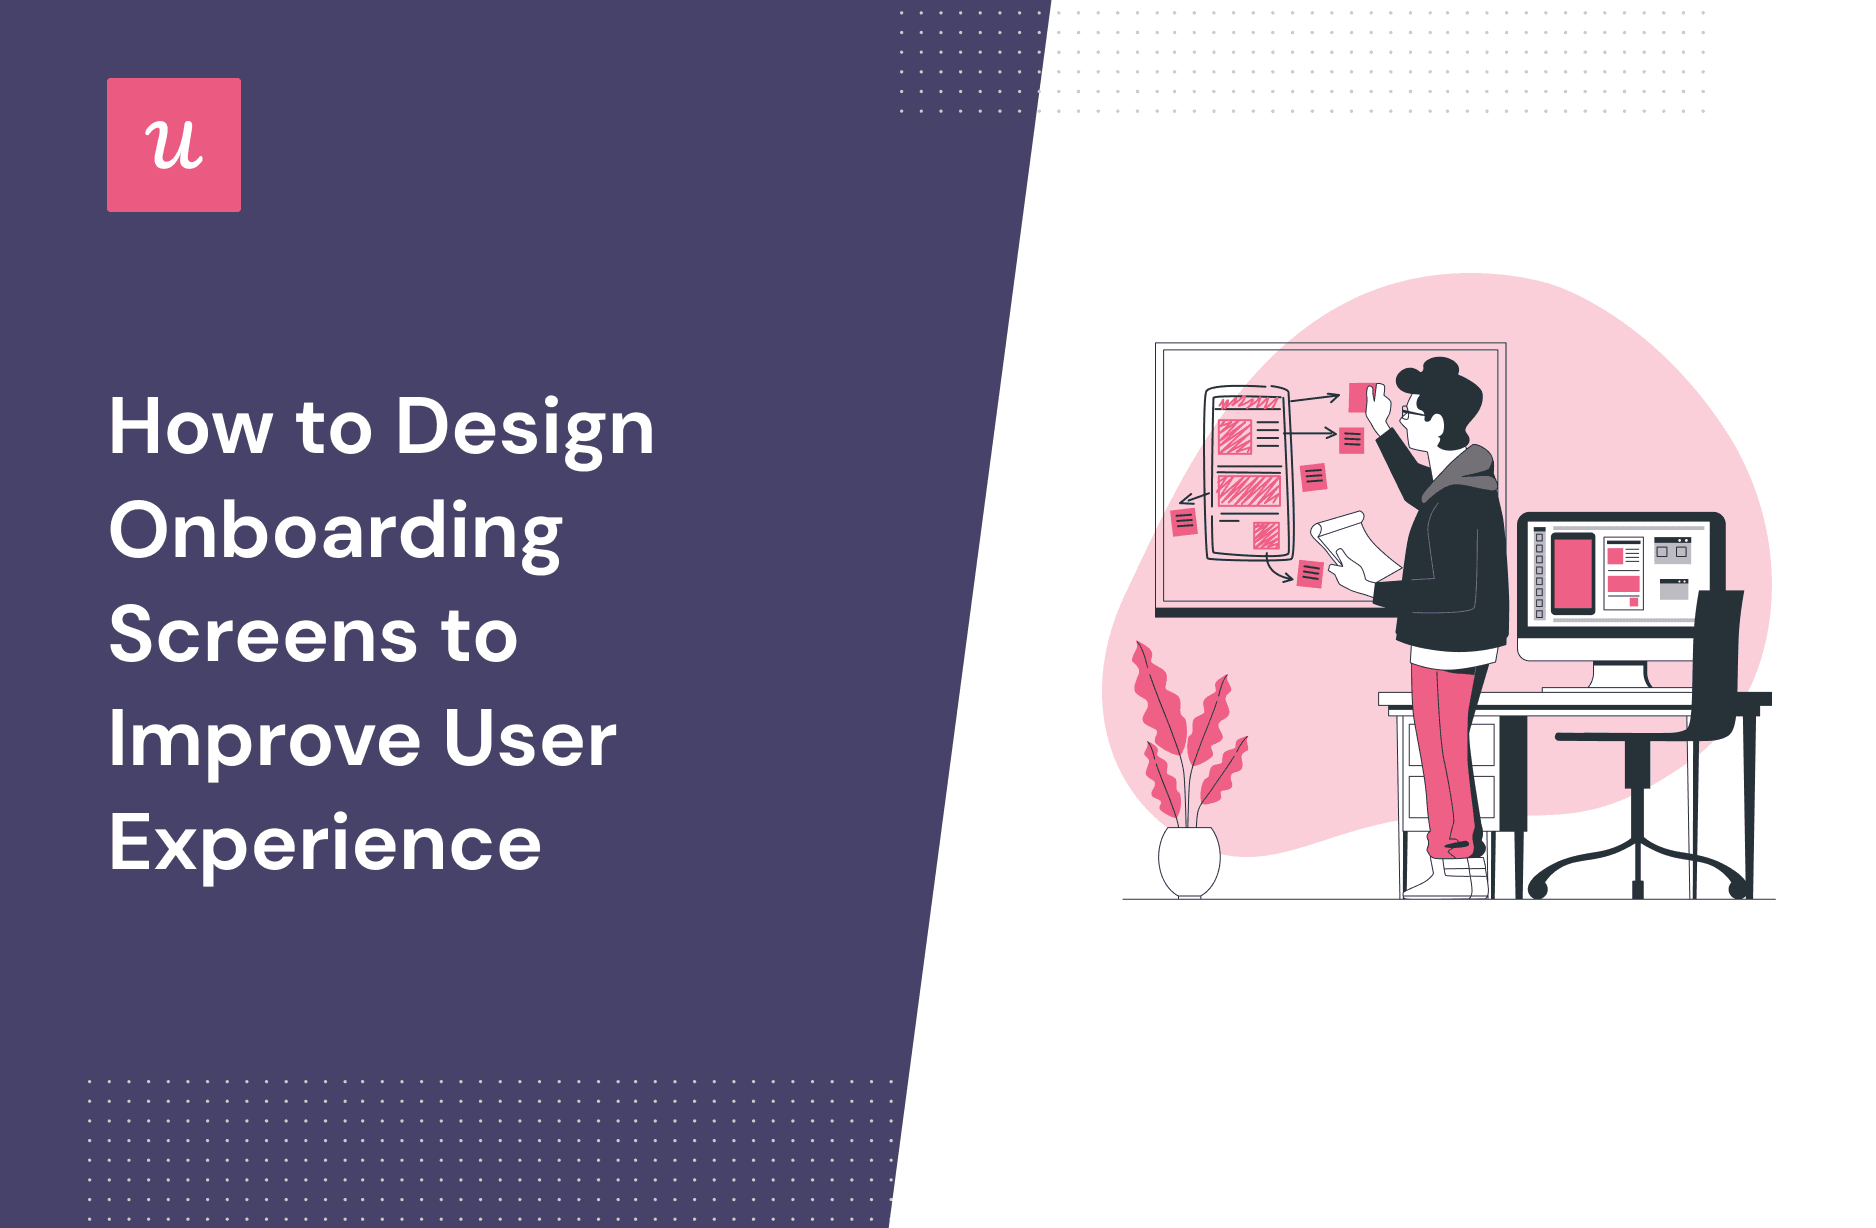 How to Design Onboarding Screens to Improve User Experience cover